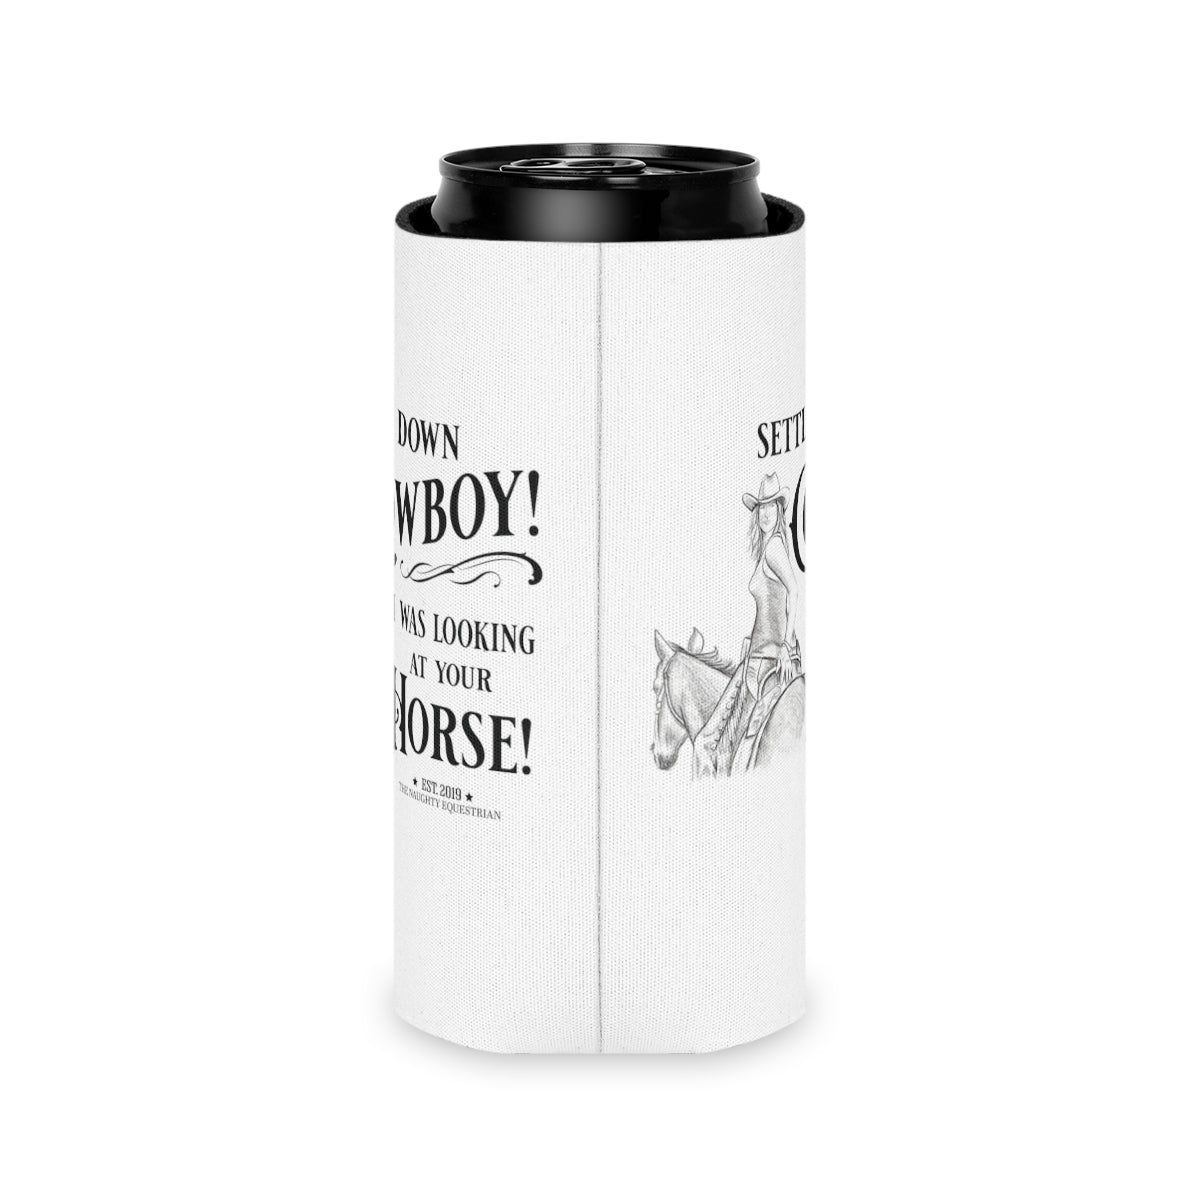 Simmer Down Cowboy Funny Can Cooler - The Naughty Equestrian